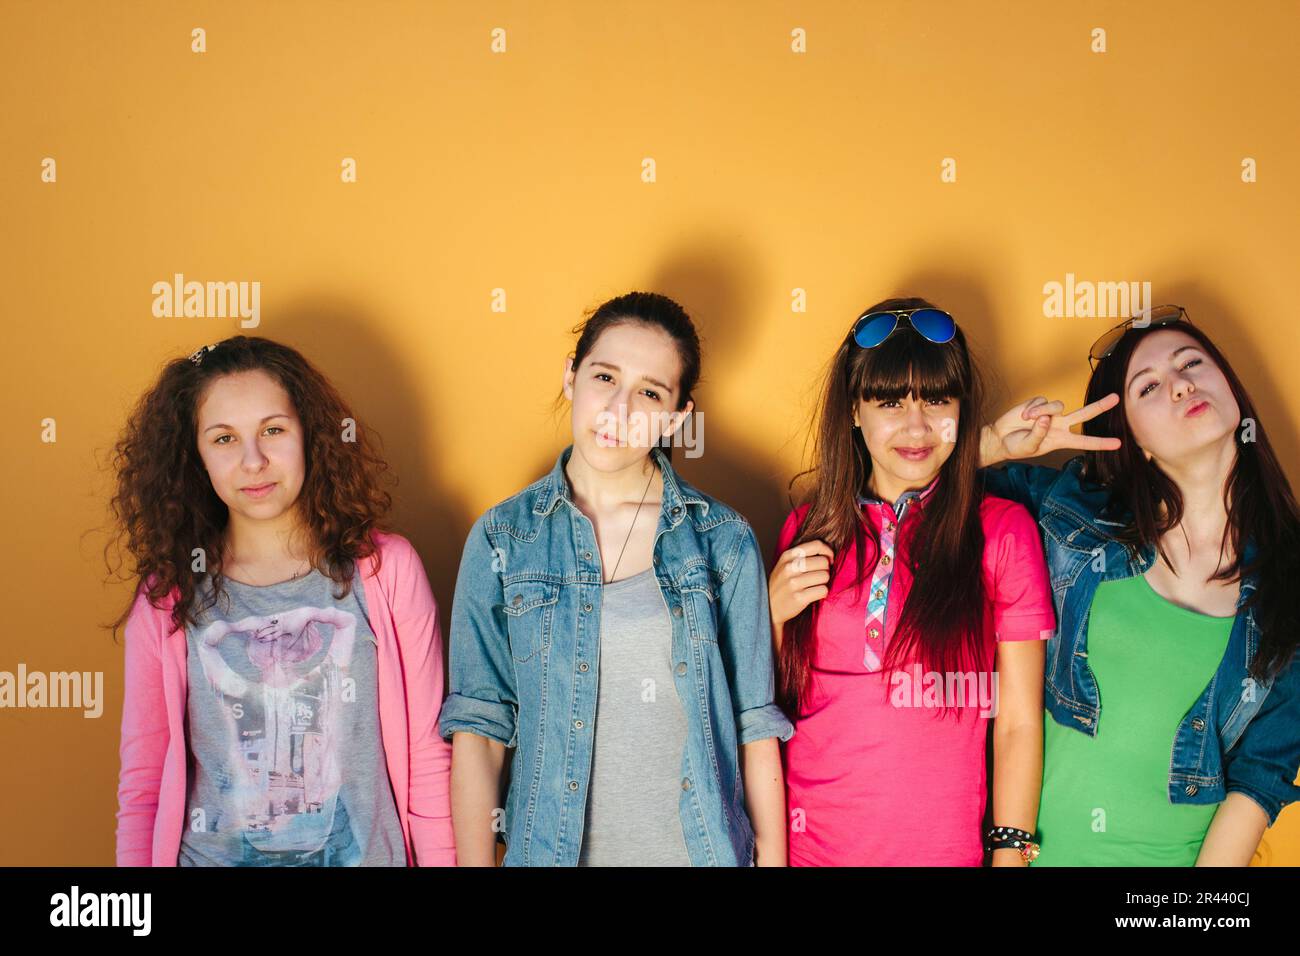 group of young cheerful girls Stock Photo